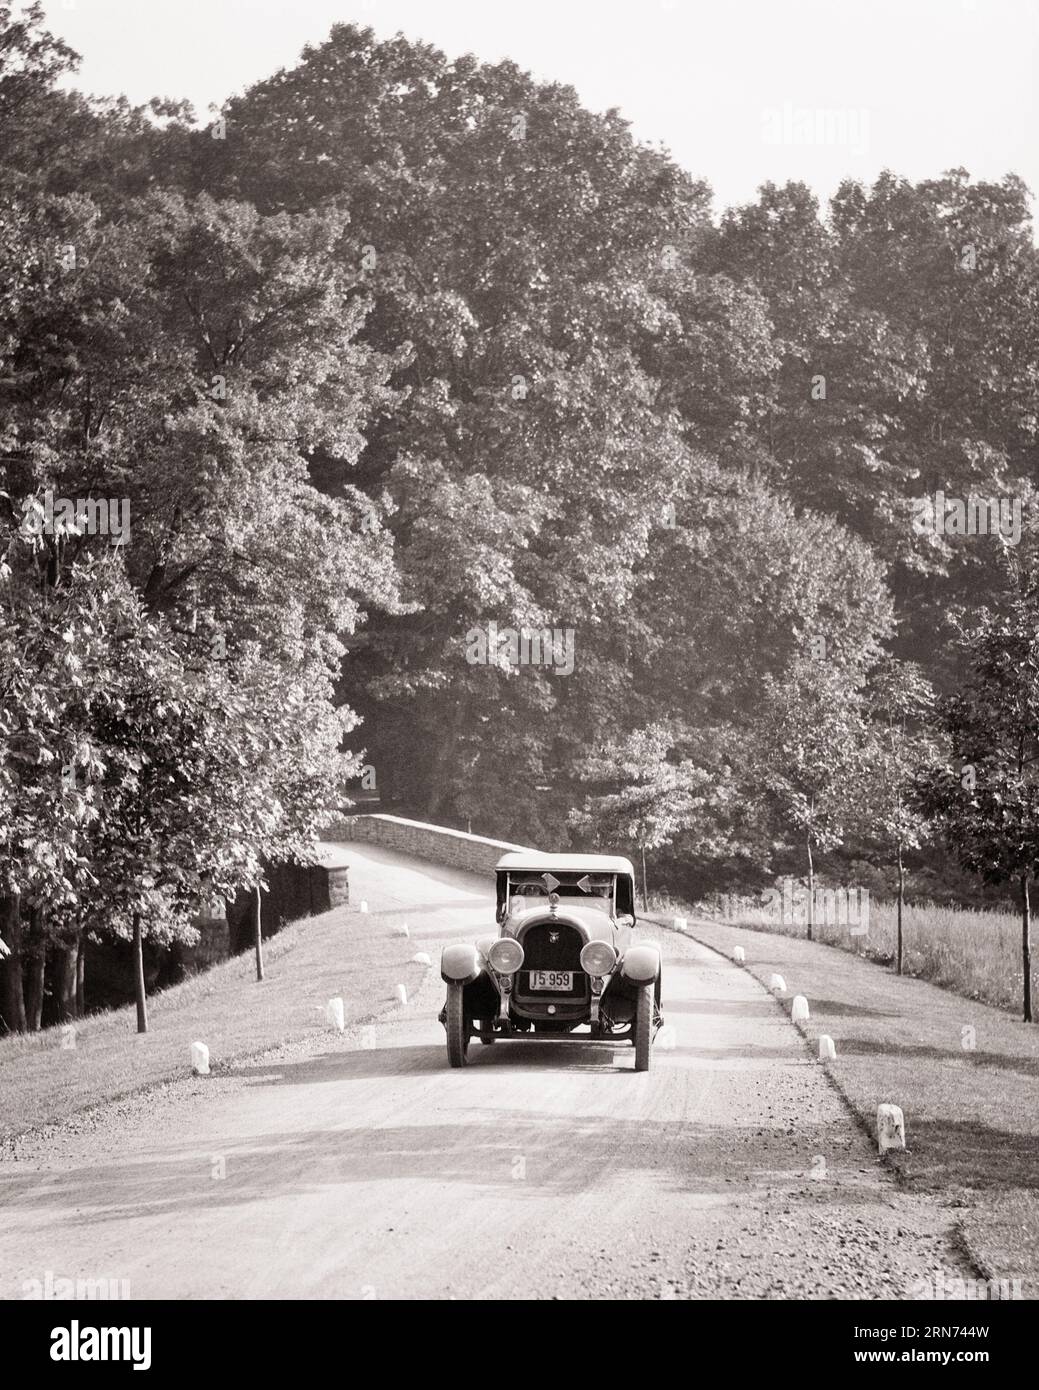 1920s ANTIQUE CONVERTIBLE TOURING CAR AUTOMOBILE ALONE ON NARROW COUNTRY LANE DRIVING TOWARDS THE CAMERA - m85 HAR001 HARS SUNDAY DRIVE CONCEPTUAL AUTOMOBILES ESCAPE STYLISH VEHICLES RELAXATION SEASON BLACK AND WHITE HAR001 OLD FASHIONED TOURING Stock Photo